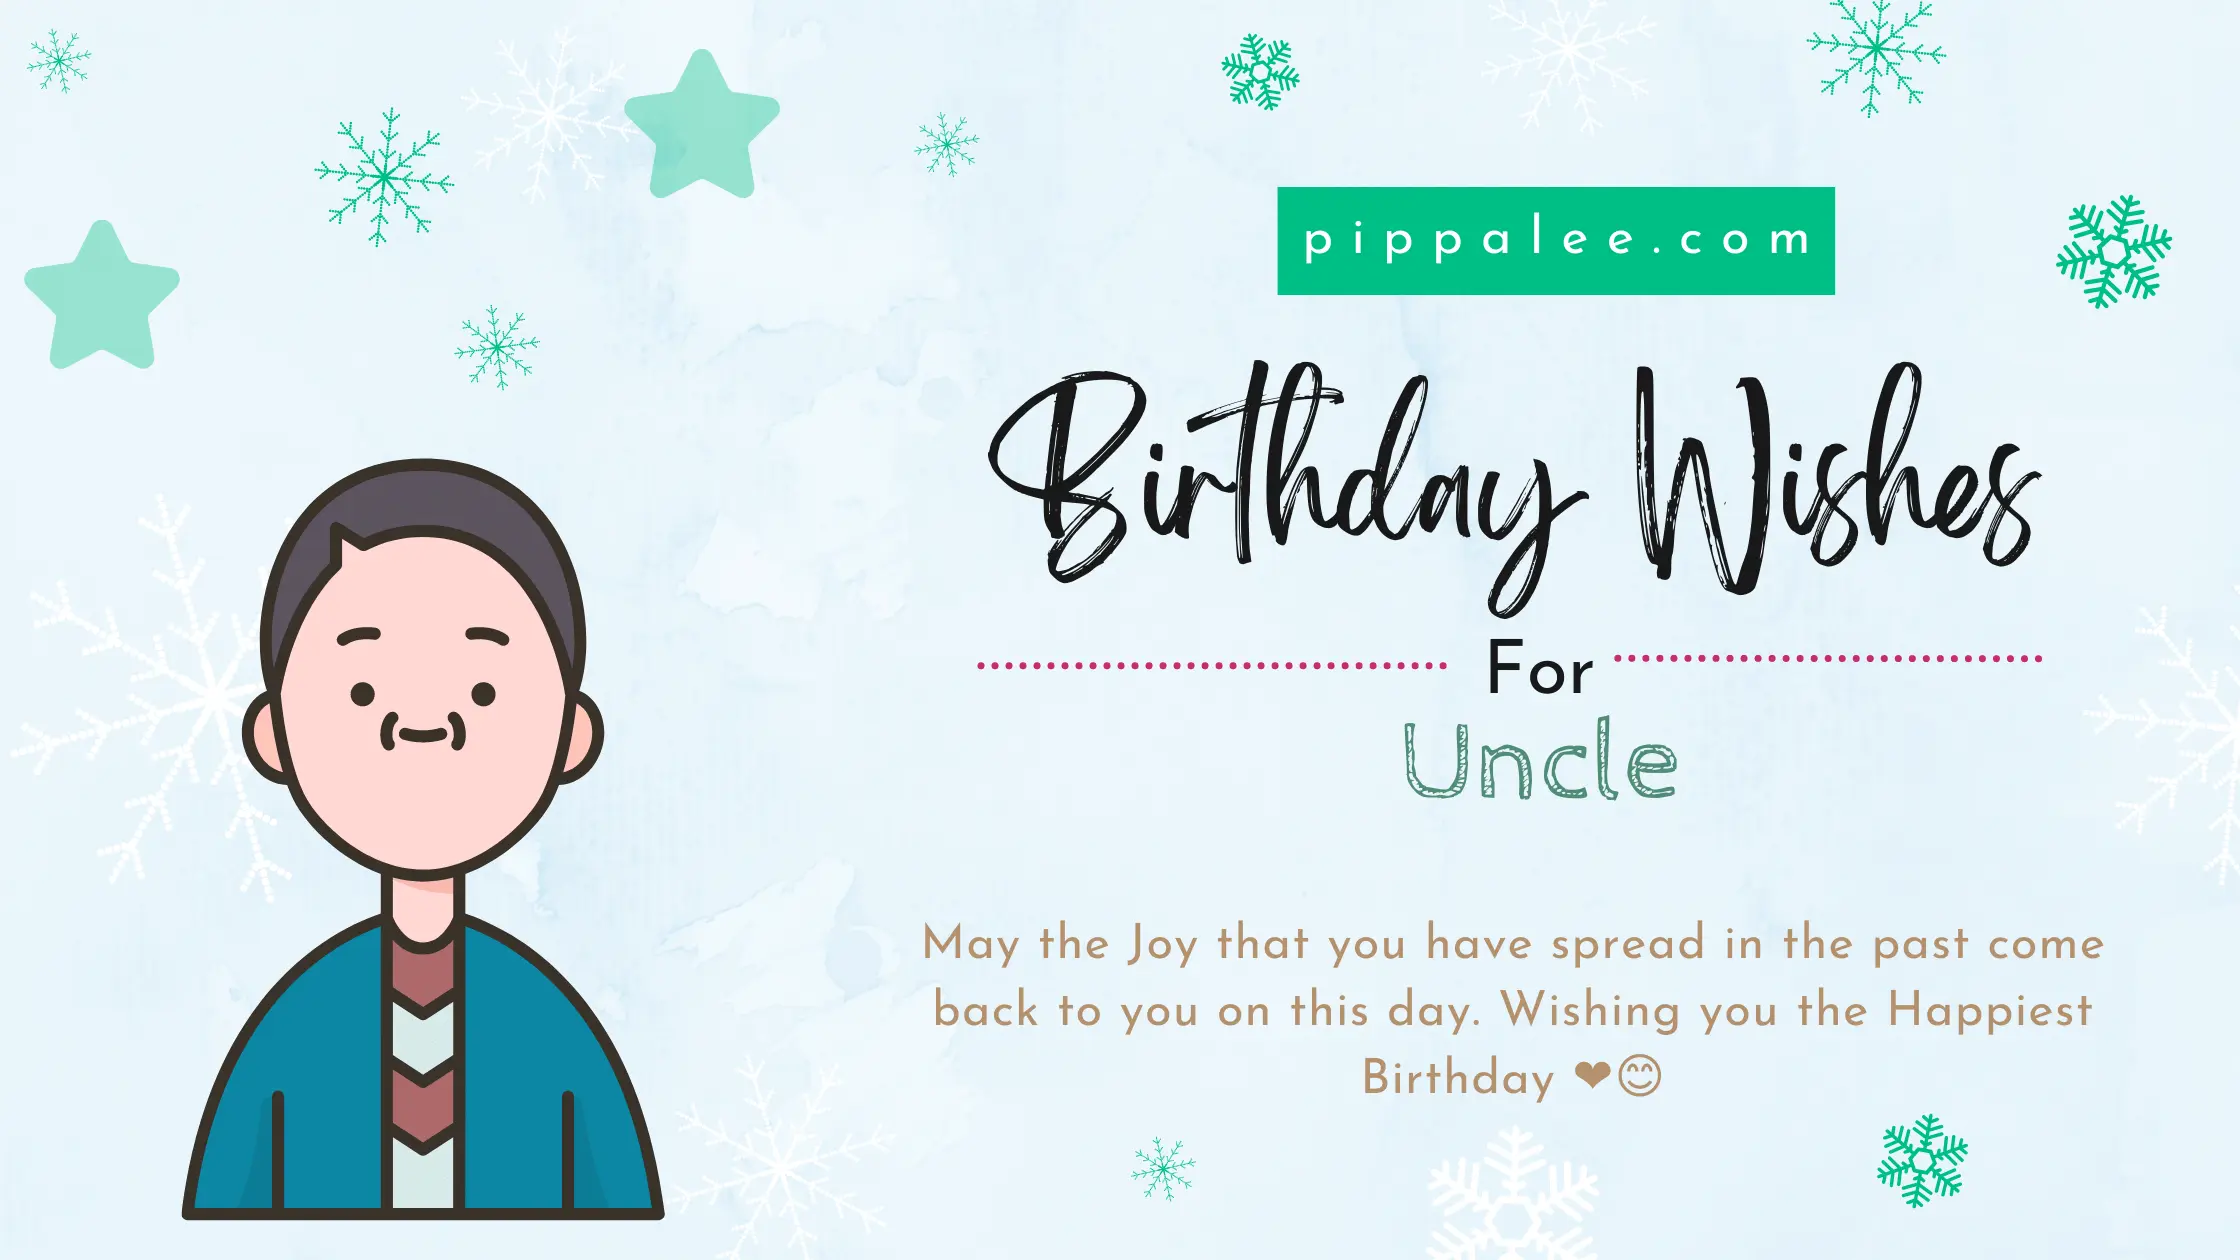 Birthday Wishes For Uncle - The Ultimate Wishes